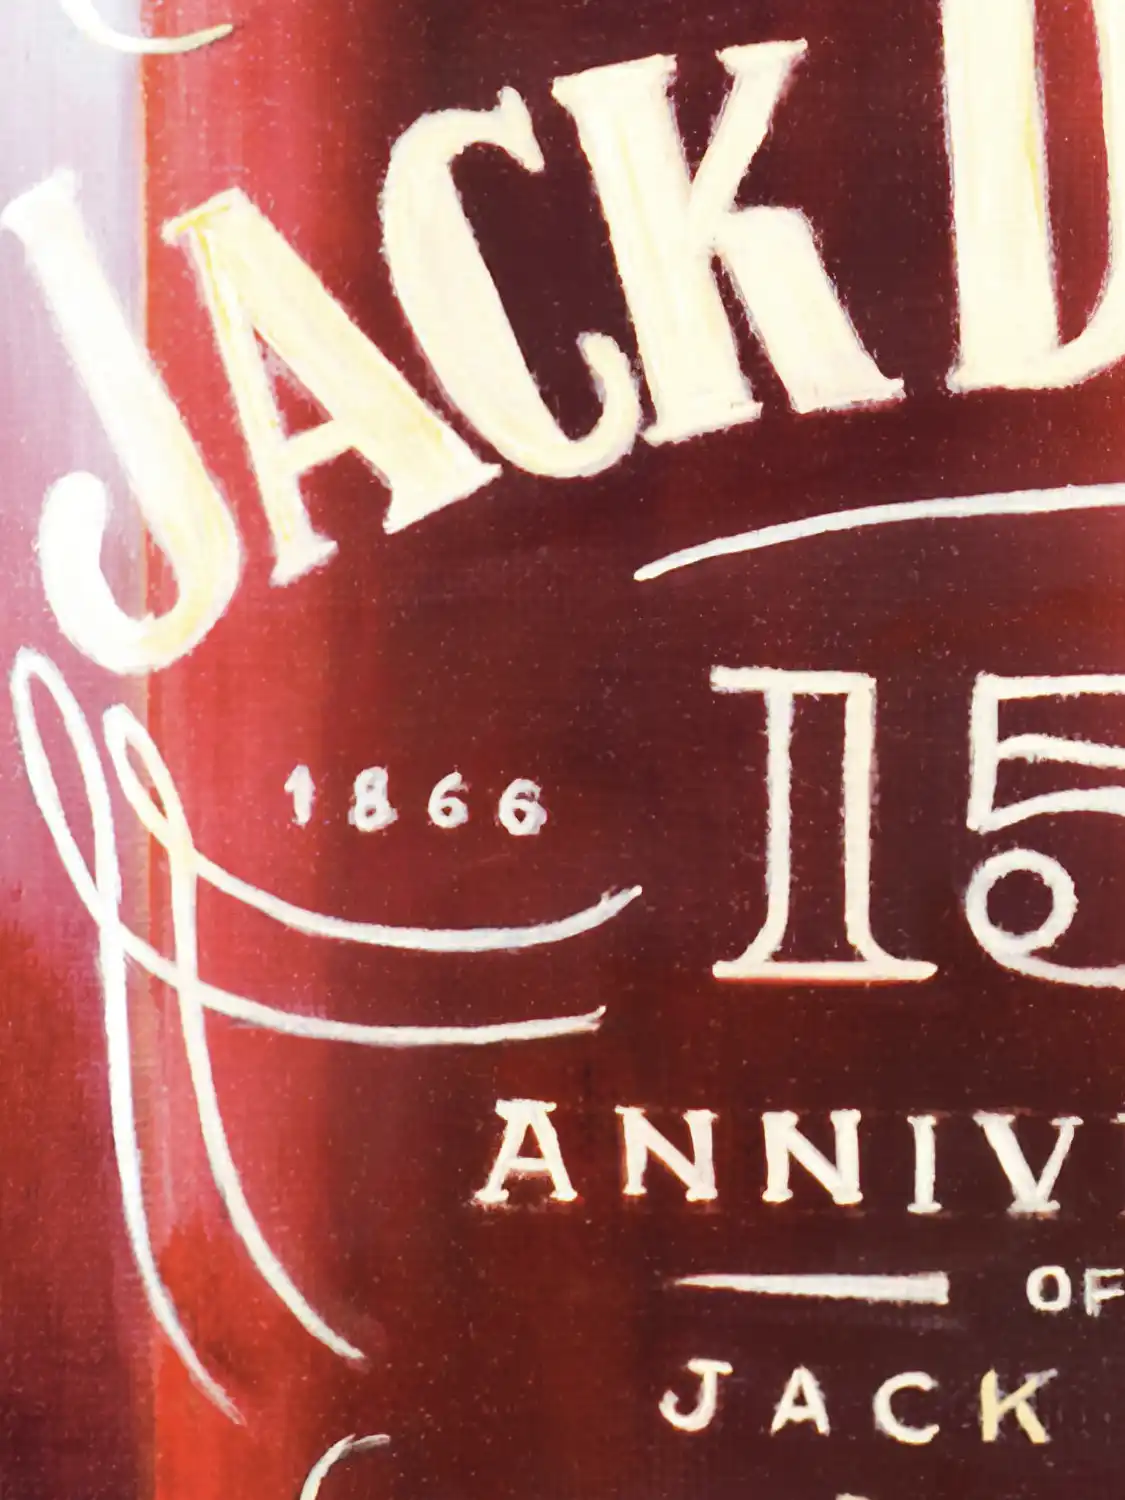 Close-up of the Jack Daniel's label in Monica Marquez Gatica's painting, showcasing the detailed oil typography.